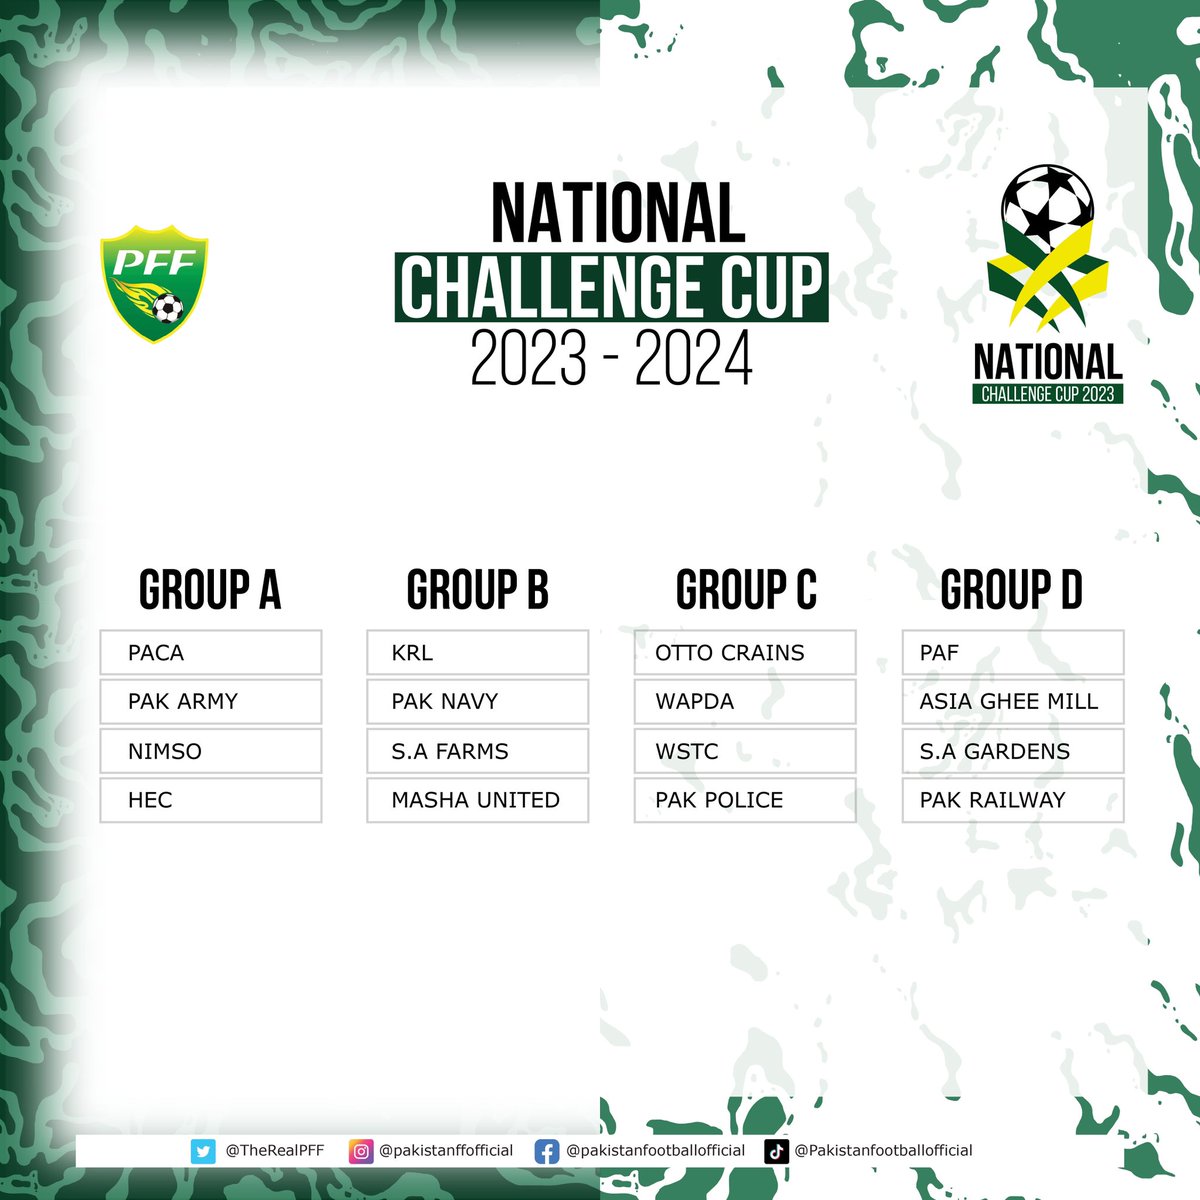 3, 2, 1.... Action !!!!  Guys, Round-2 of The National Challenge Cup 2023-2024 kicks off today, in Islamabad! ⚽ .

Really excited for the teams a d lads competing at the very competitive level. #PakutanFootball

#pakistanfootball #dilsayfootball #shaheens #nationalchallengecup